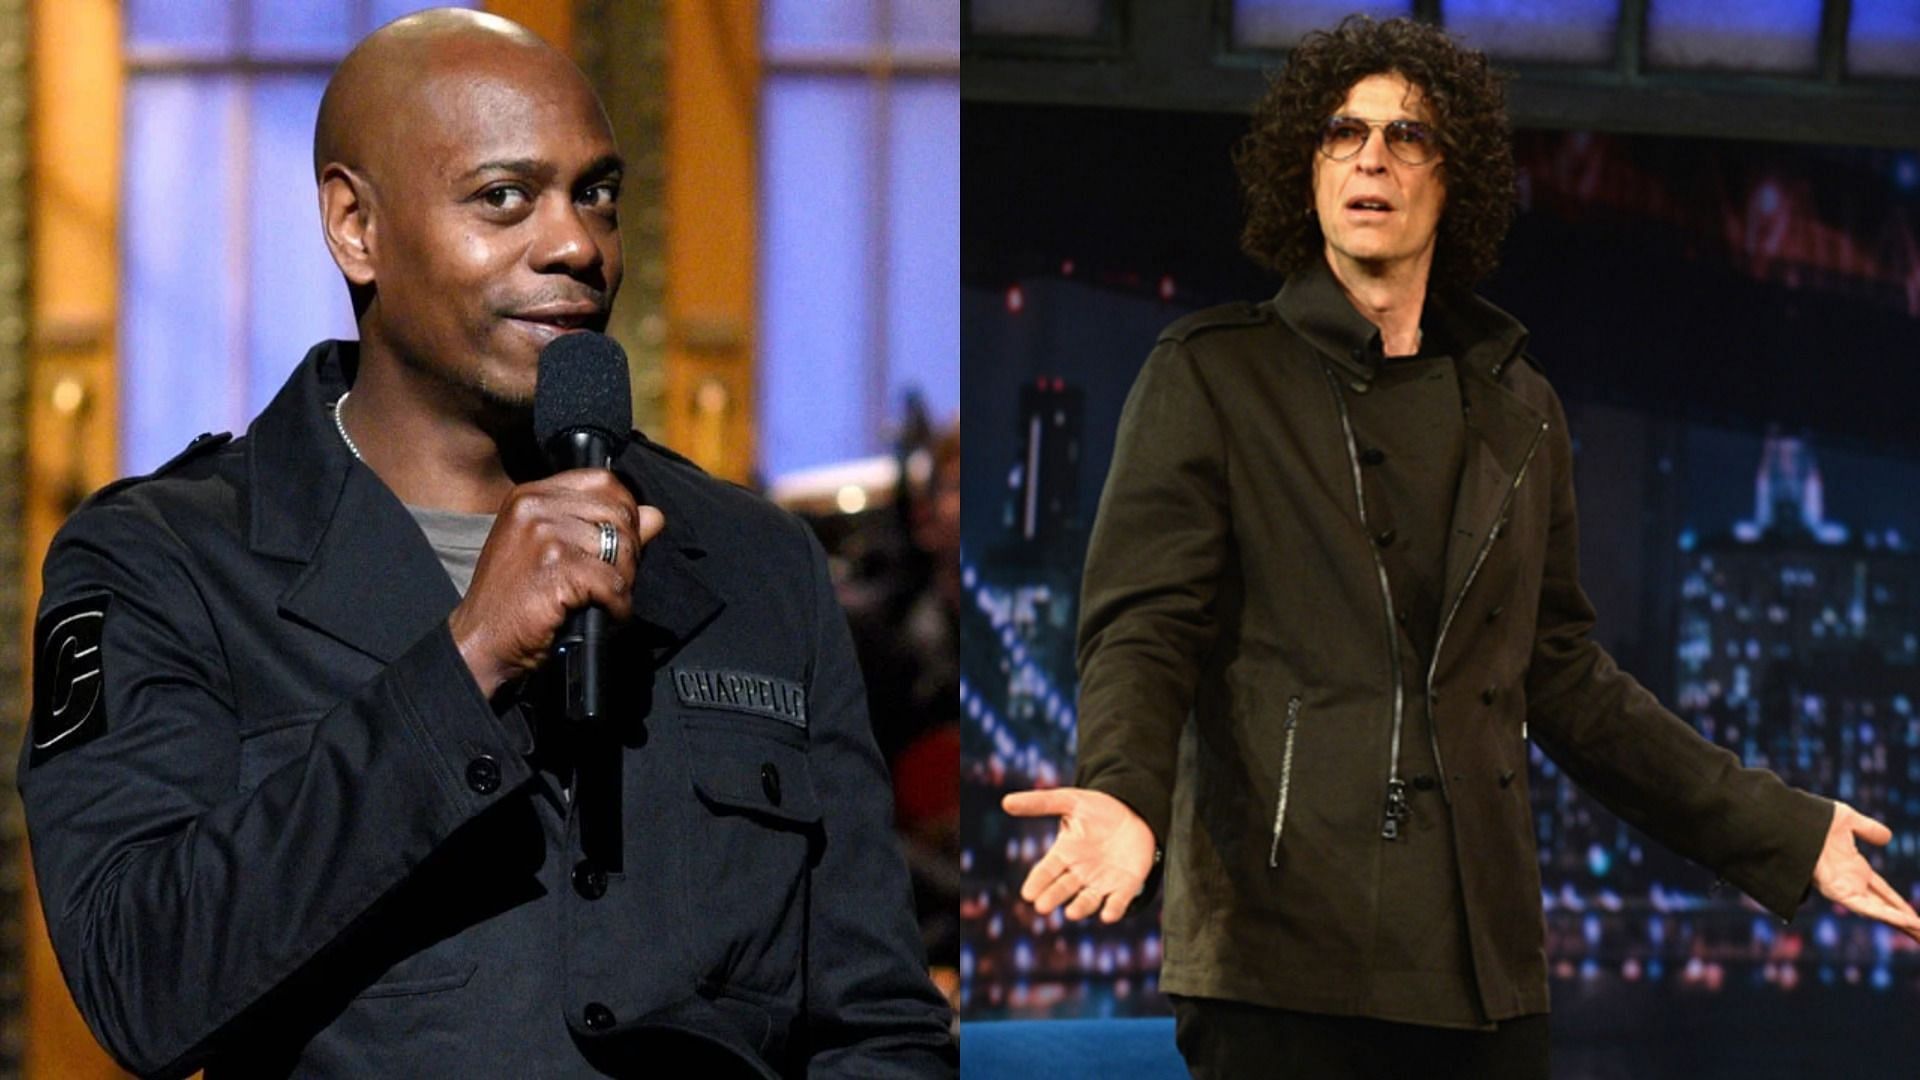 Howard Stern previously criticized Will Smith for slapping Chris Rock at the Academy Awards. (Image via Getty Images/Will Heath/Theo Wargo)